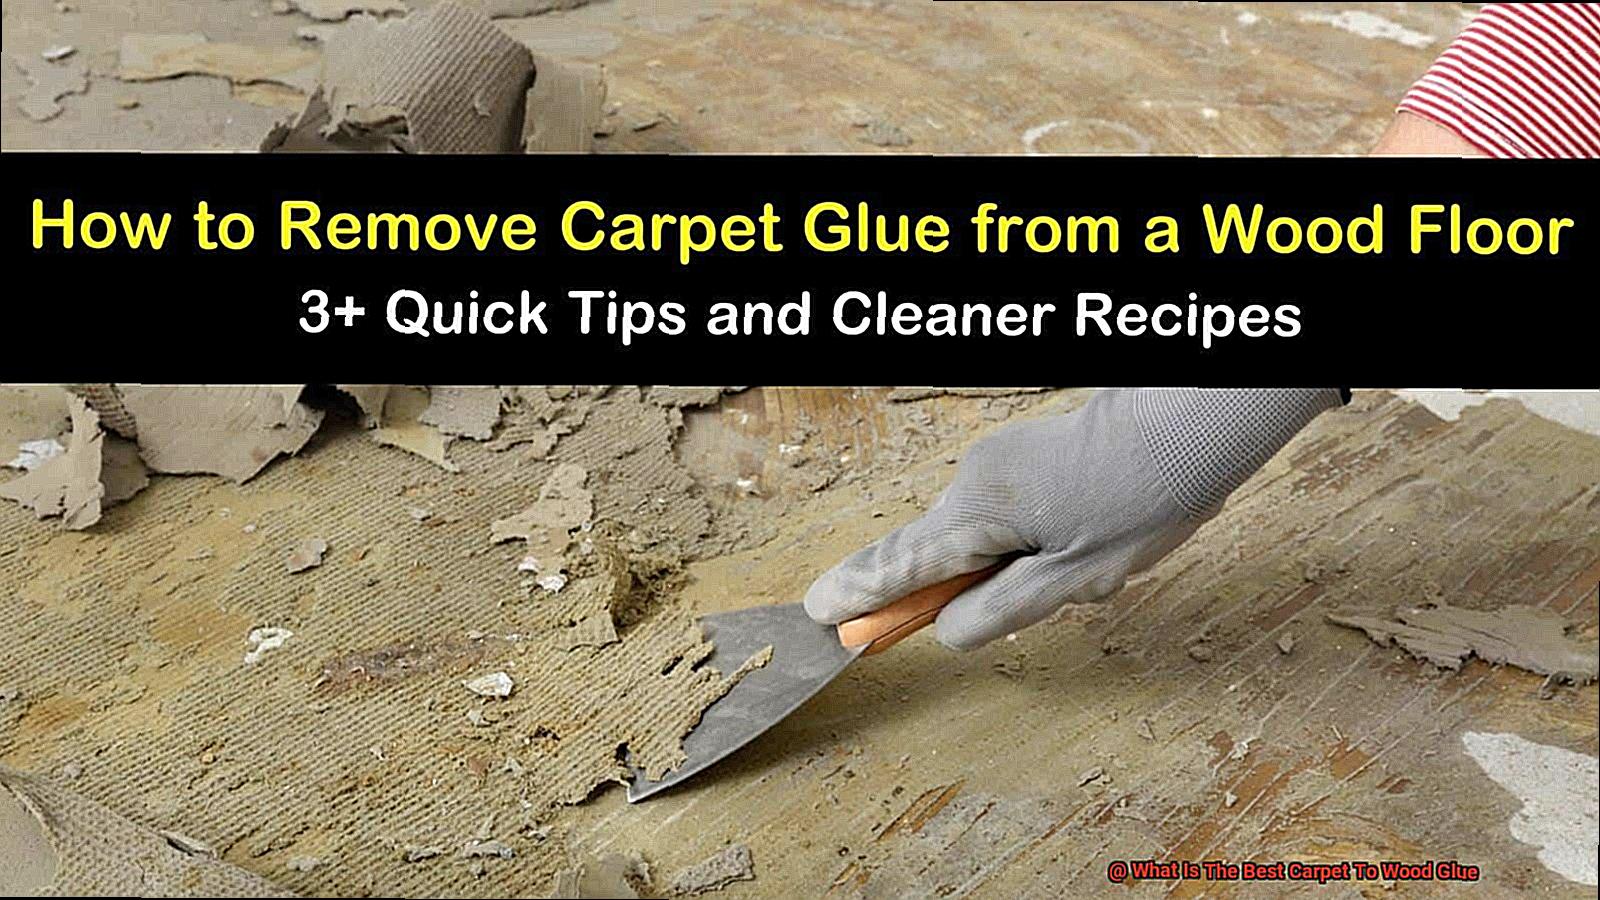 What Is The Best Carpet To Wood Glue-3